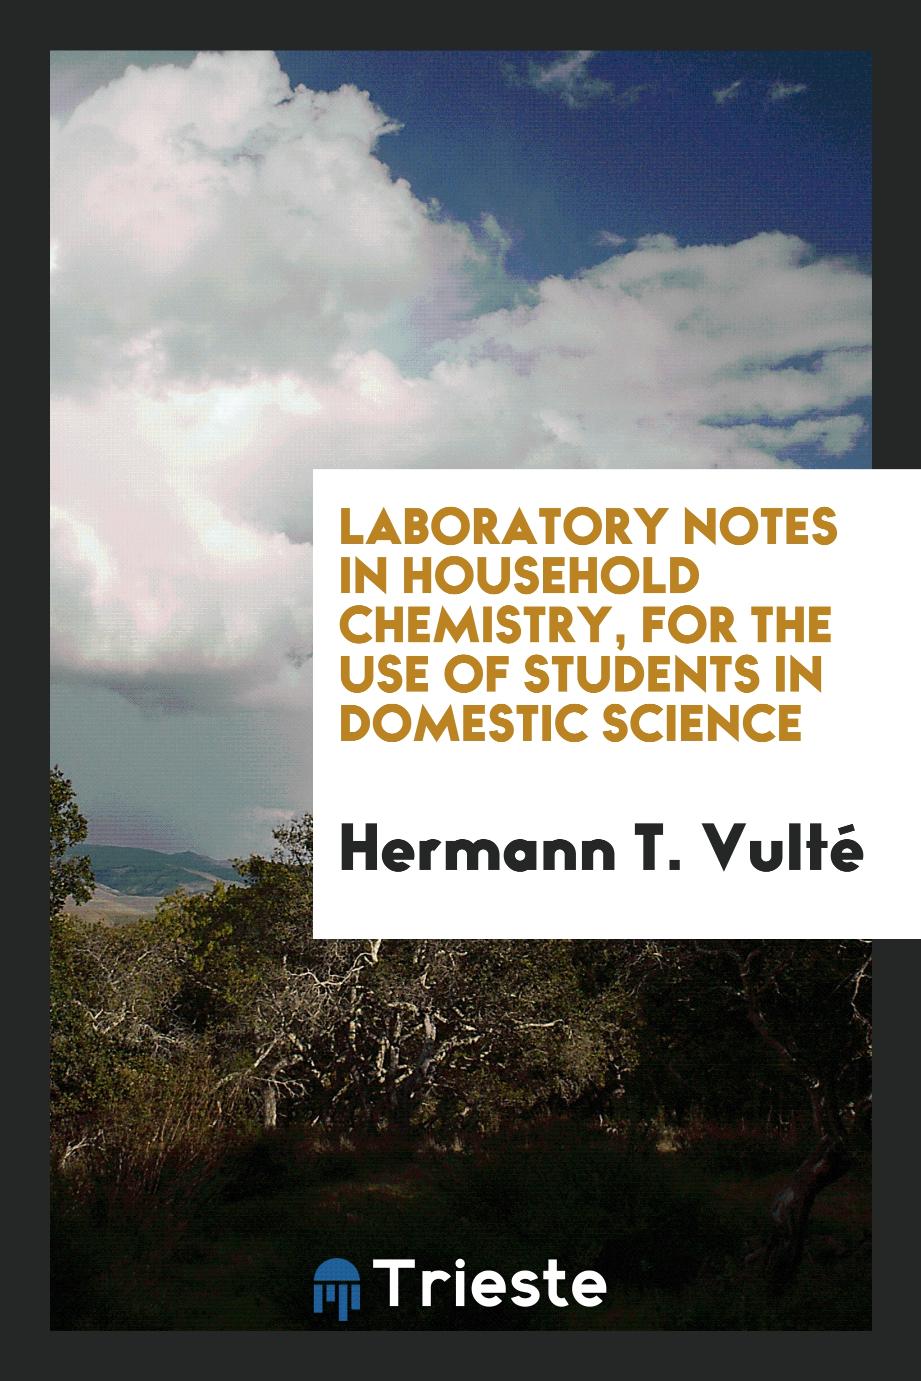 Laboratory notes in household chemistry, for the use of students in domestic science